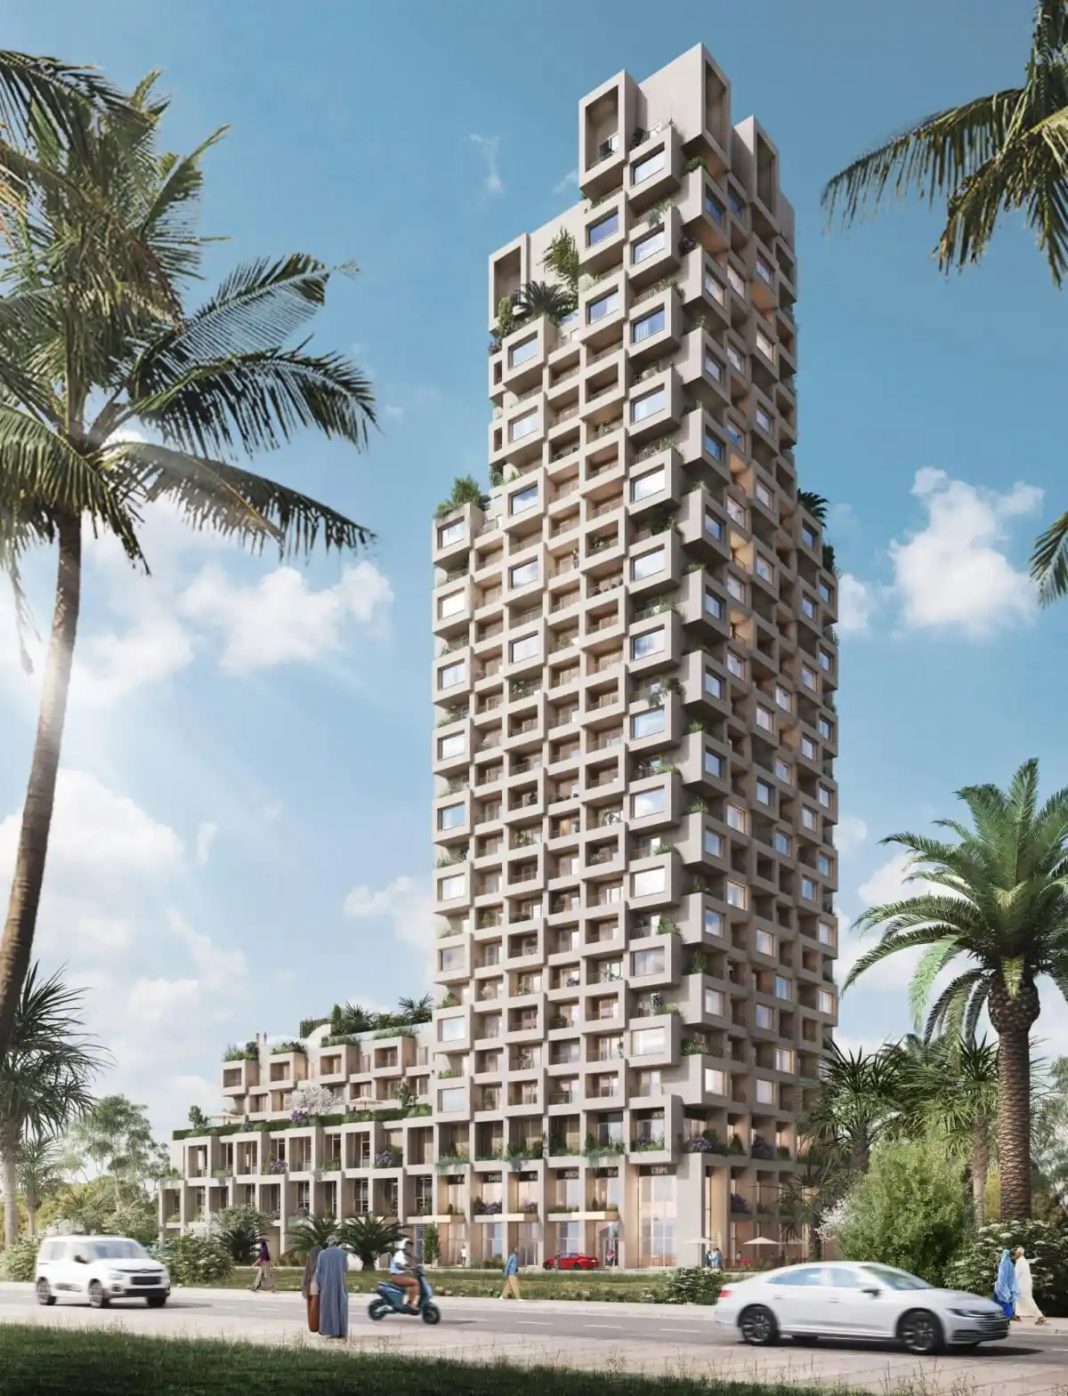 World’s tallest timber apartment tower to be constructed in Zanzibar